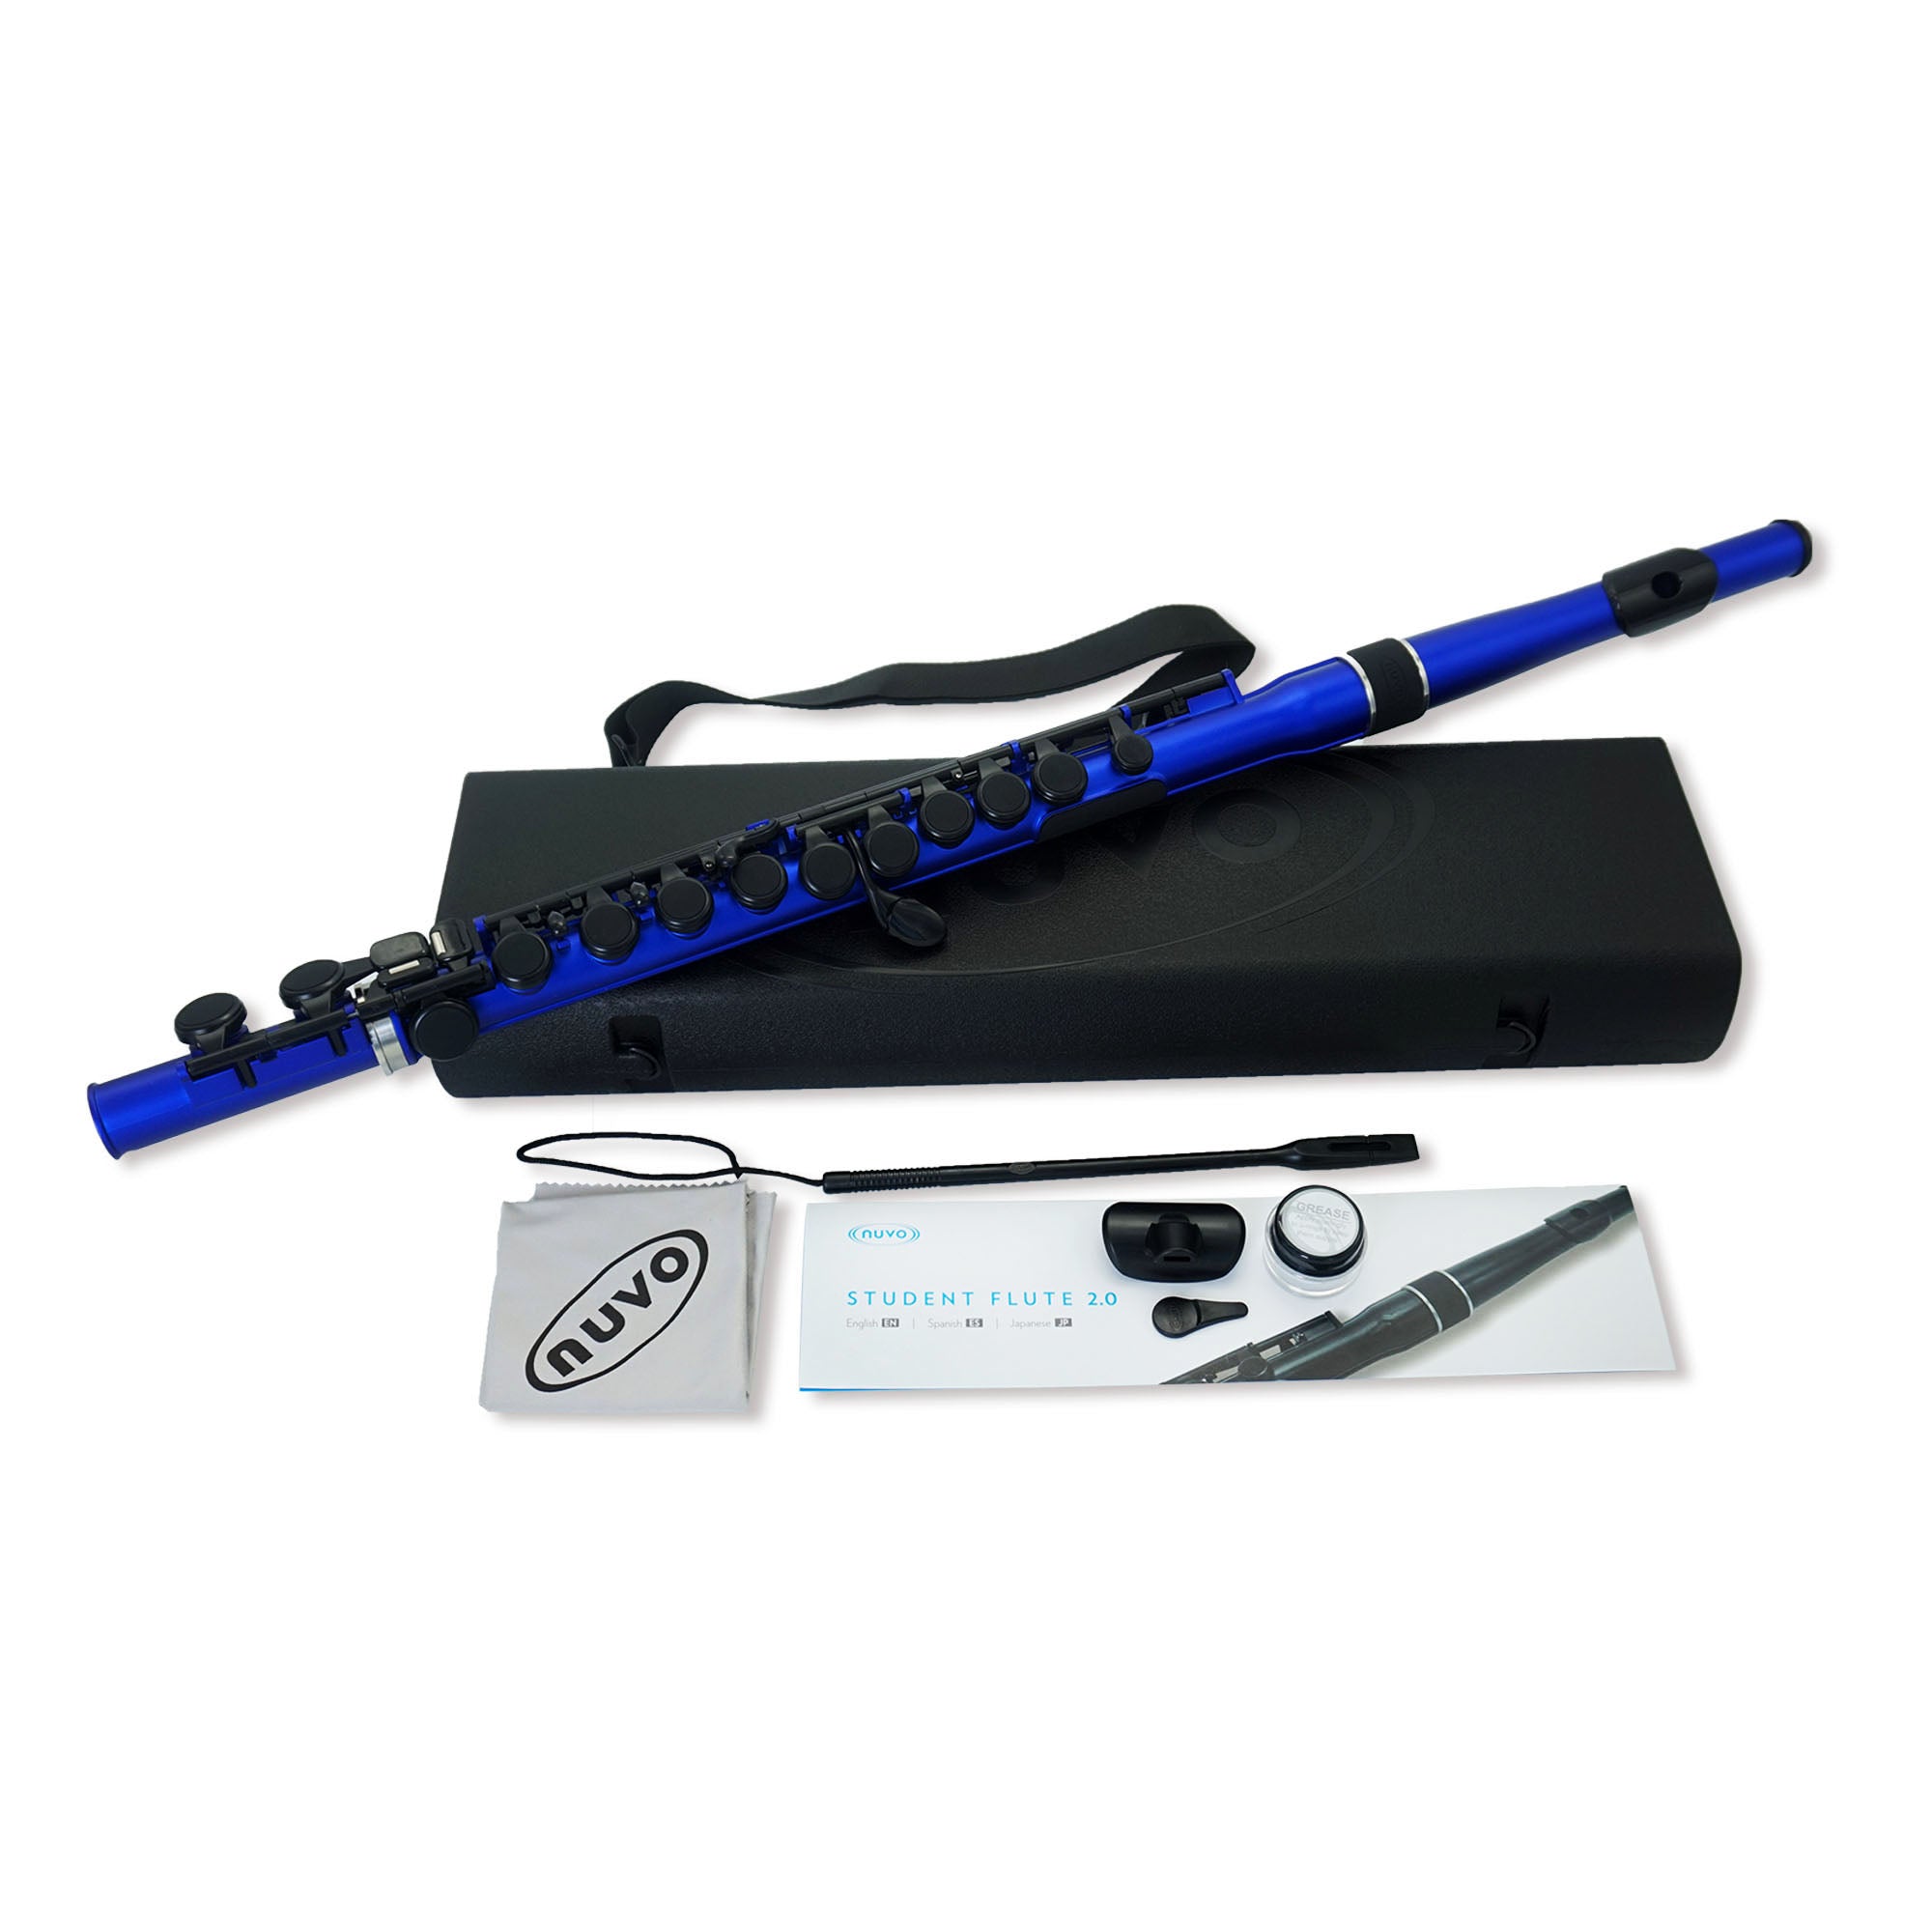 Nuvo Student Flute 2.0 (assorted colors)